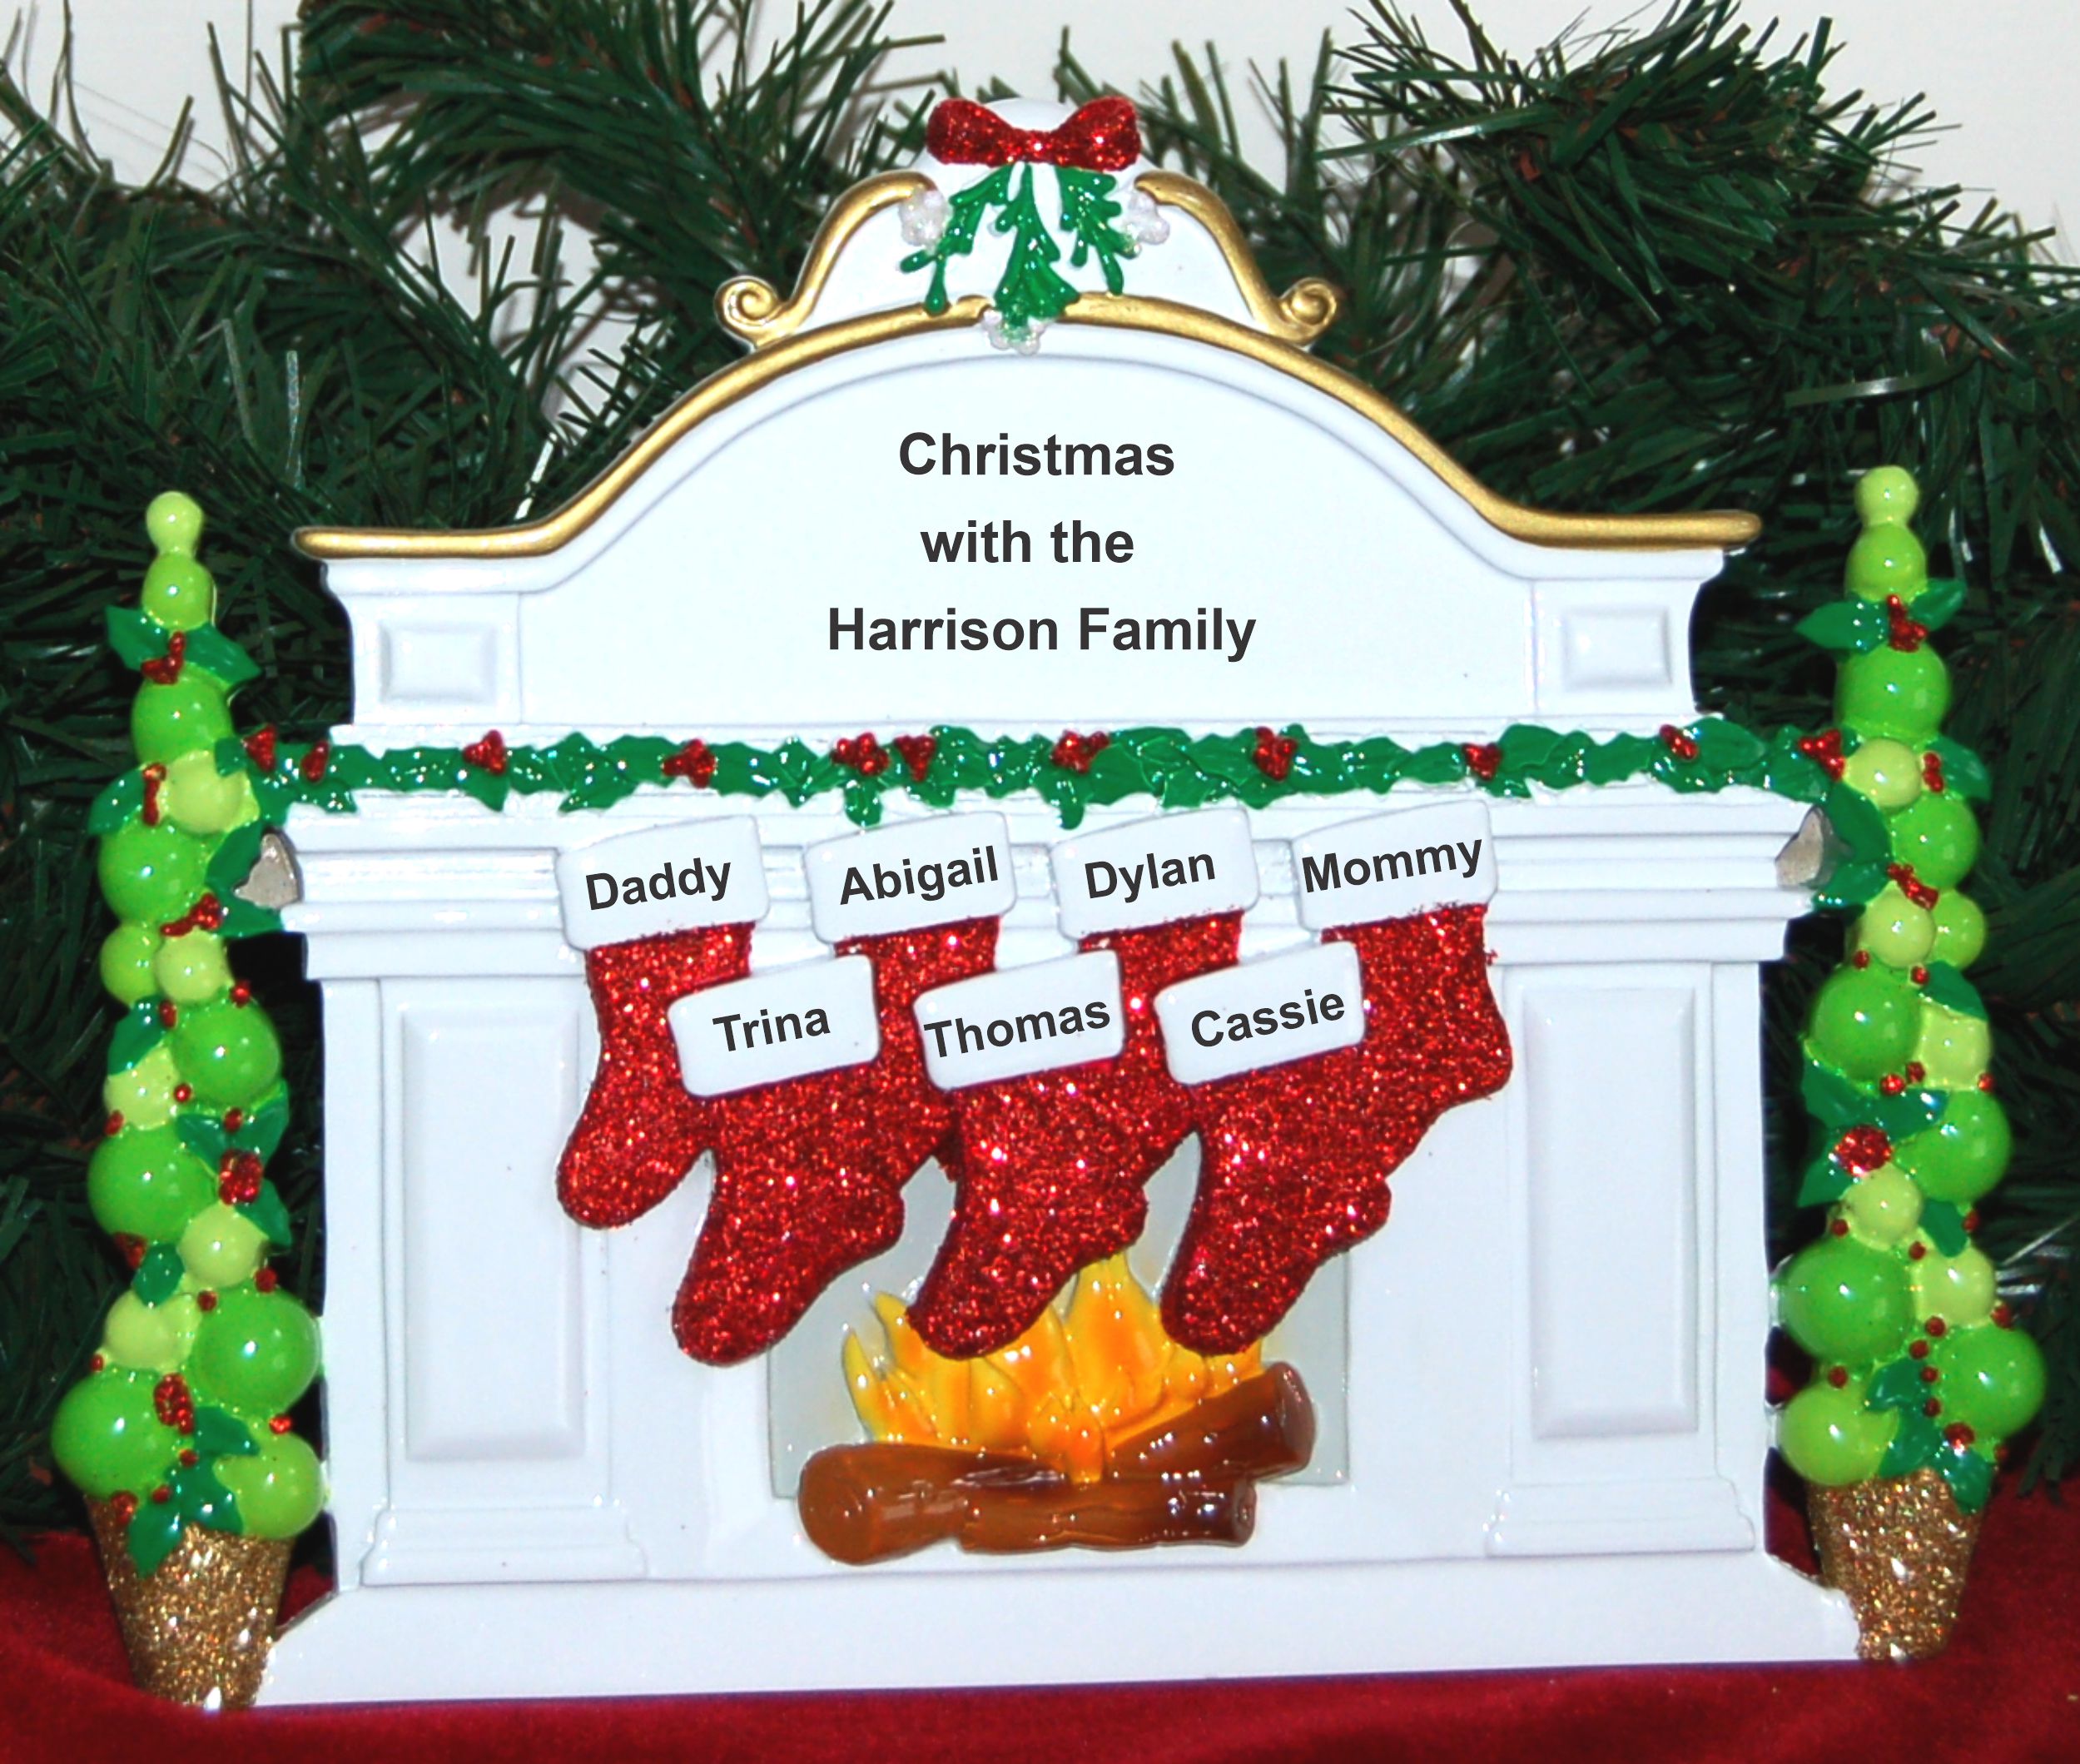 Tabletop Christmas Decoration Mantel for 7 Personalized by RussellRhodes.com